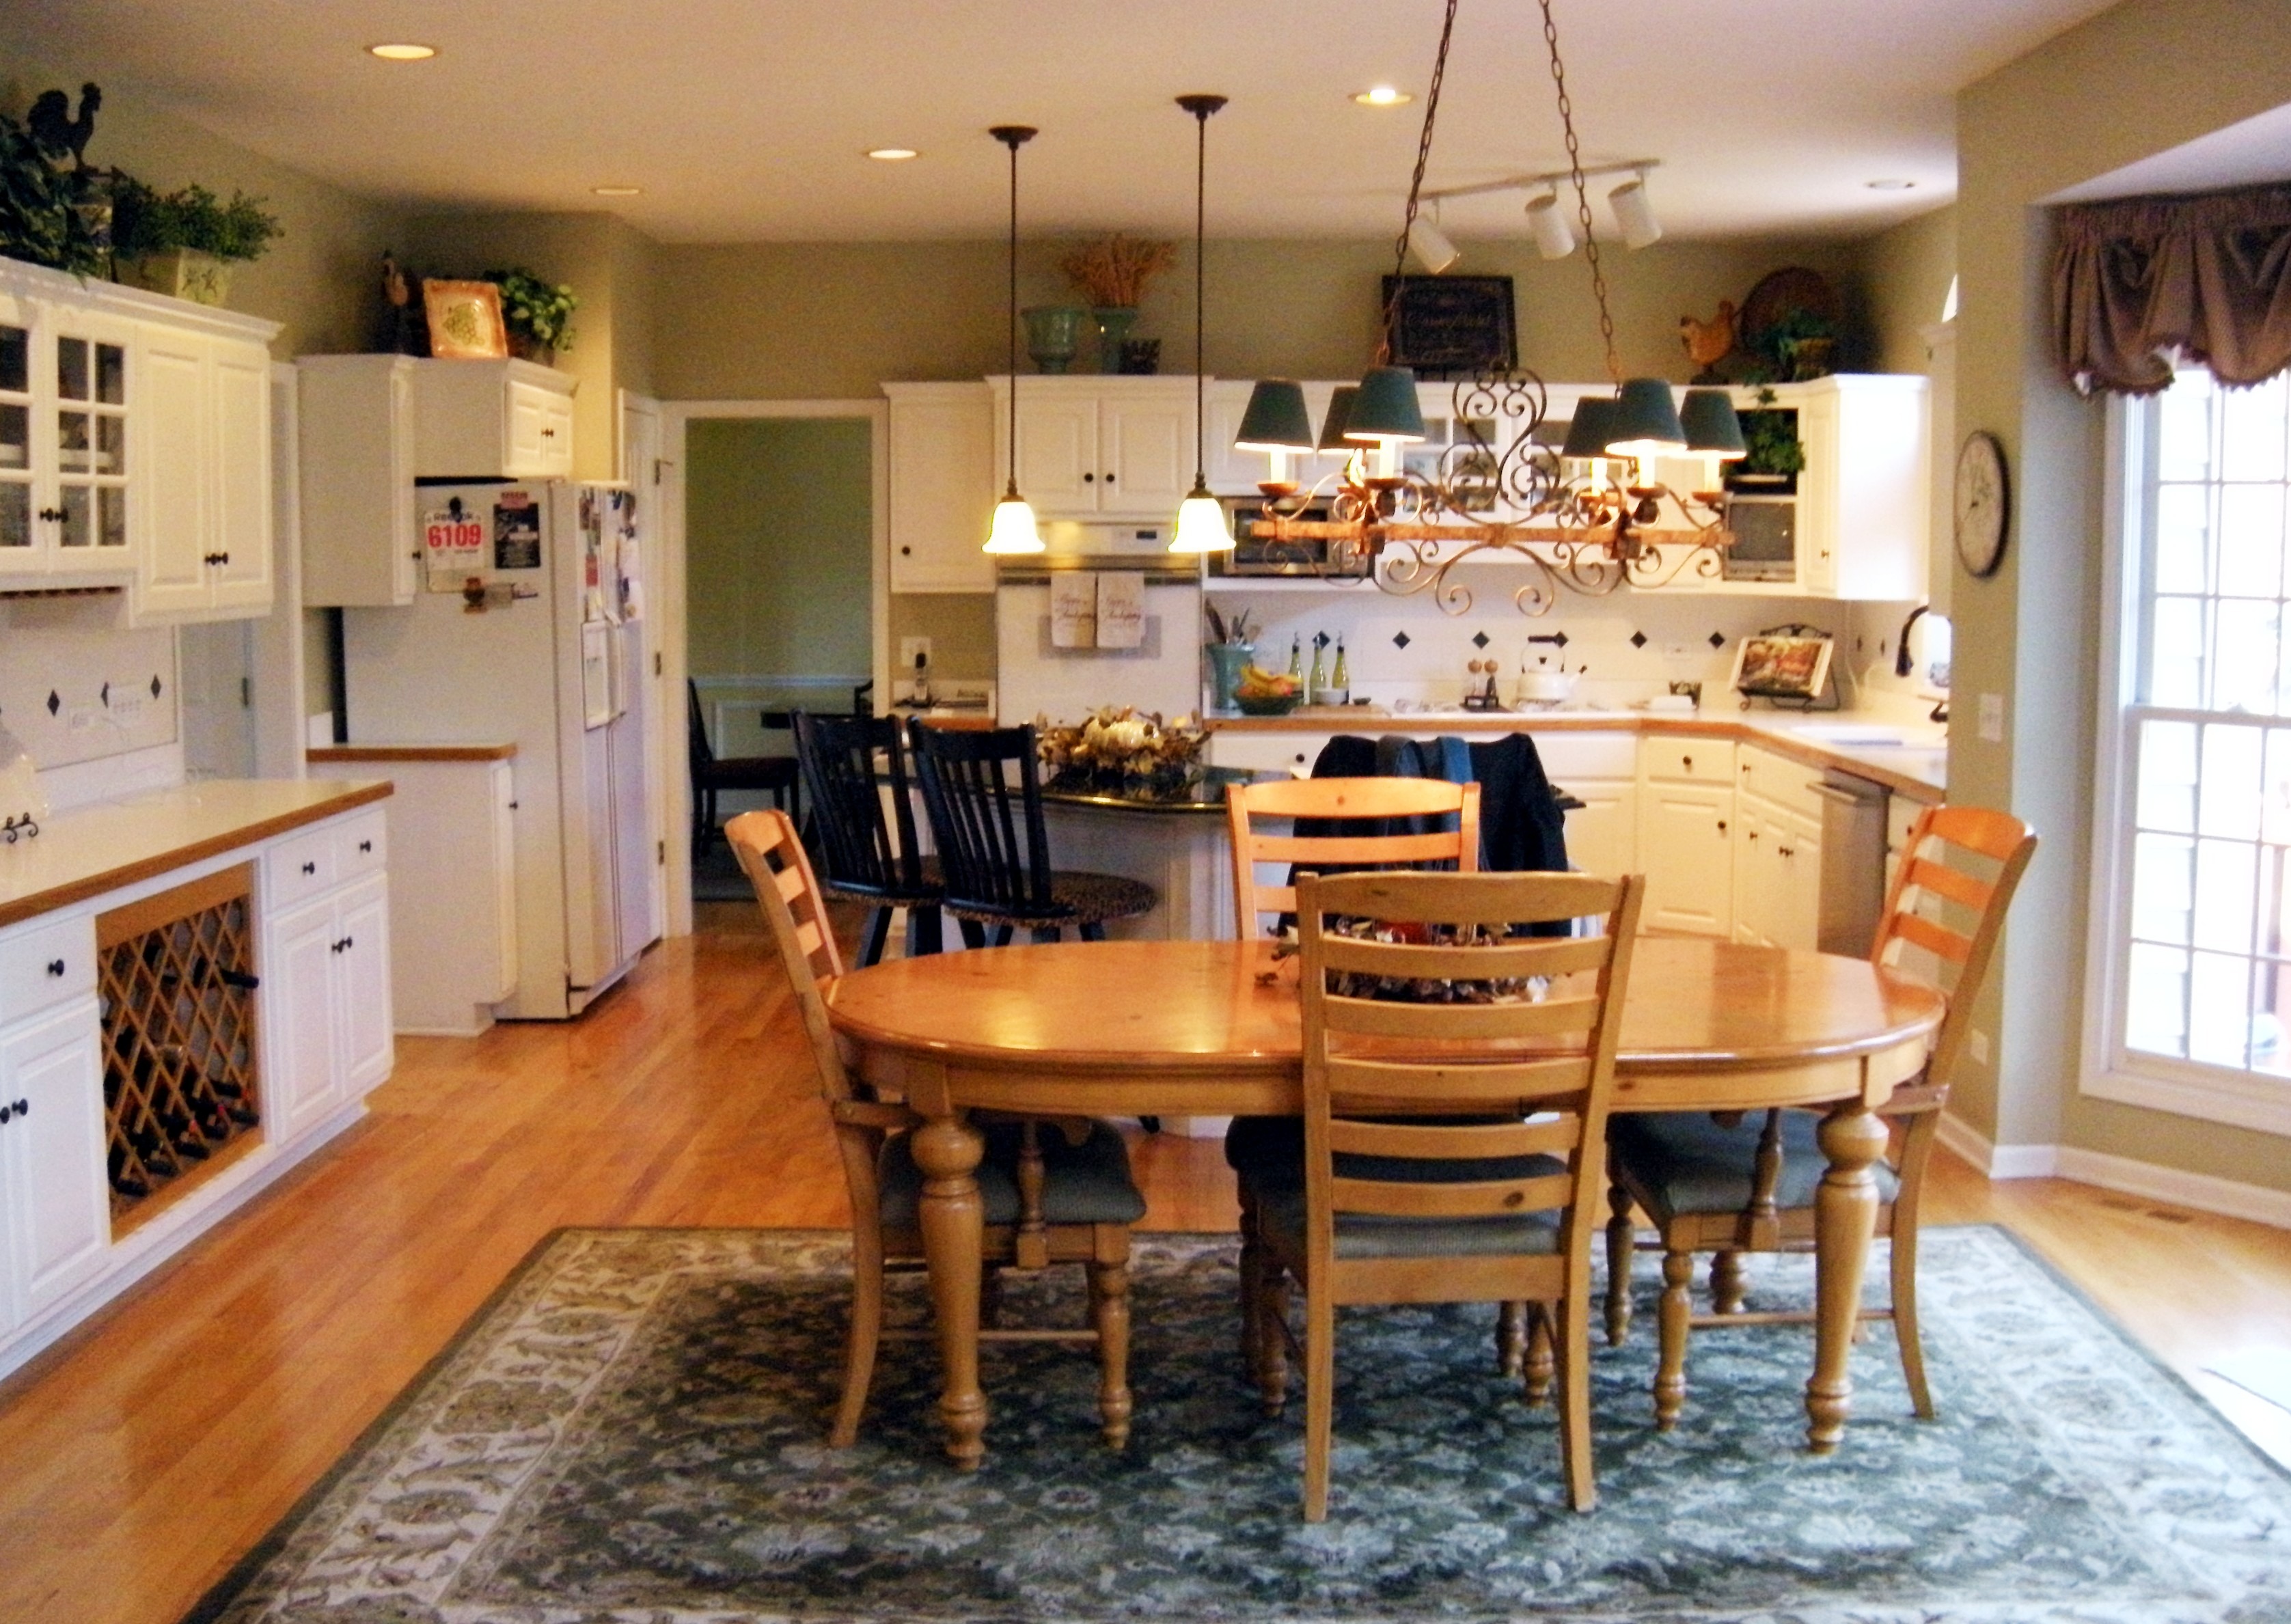 Kitchen remodeling in Naperville, IL. Traditional kitchen area before redesign.